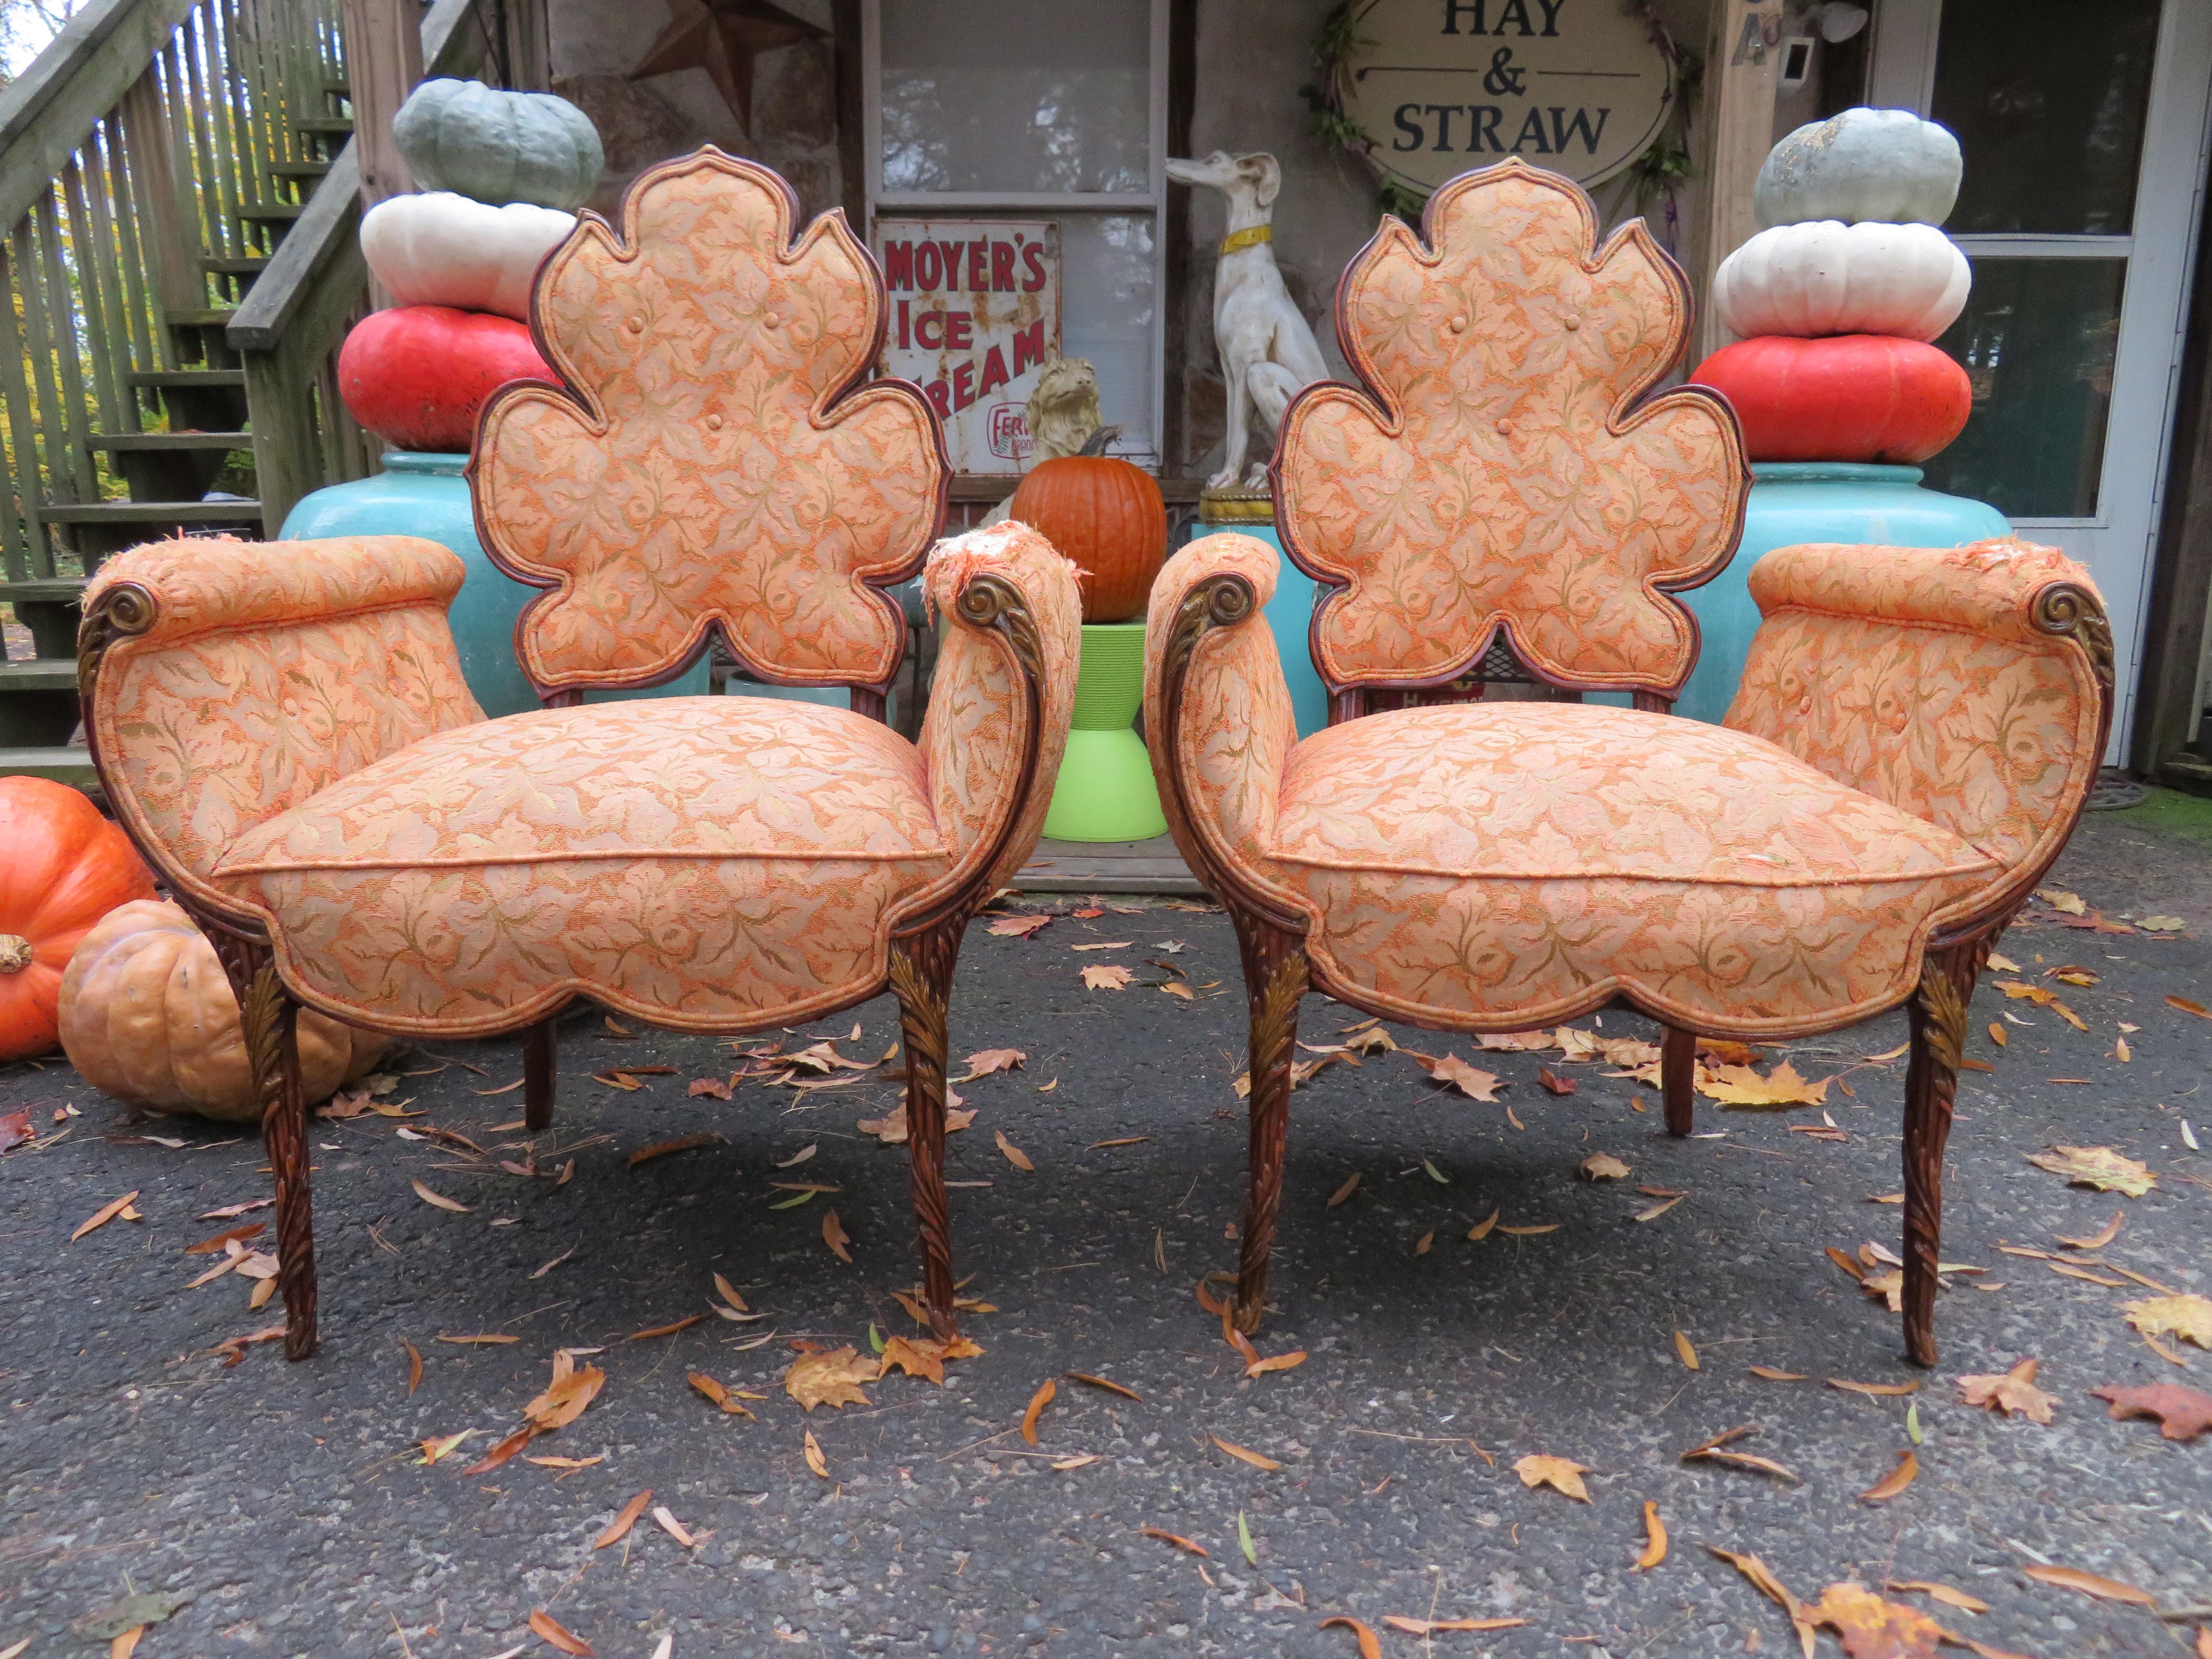 A spectacular pair of Grosfeld House chairs featuring a flower shaped backrest, channeled arms and an intricate carved wooden frame. A rare and completely stunning pair of chairs from the prestigious design house, 1940s. The original fabric does